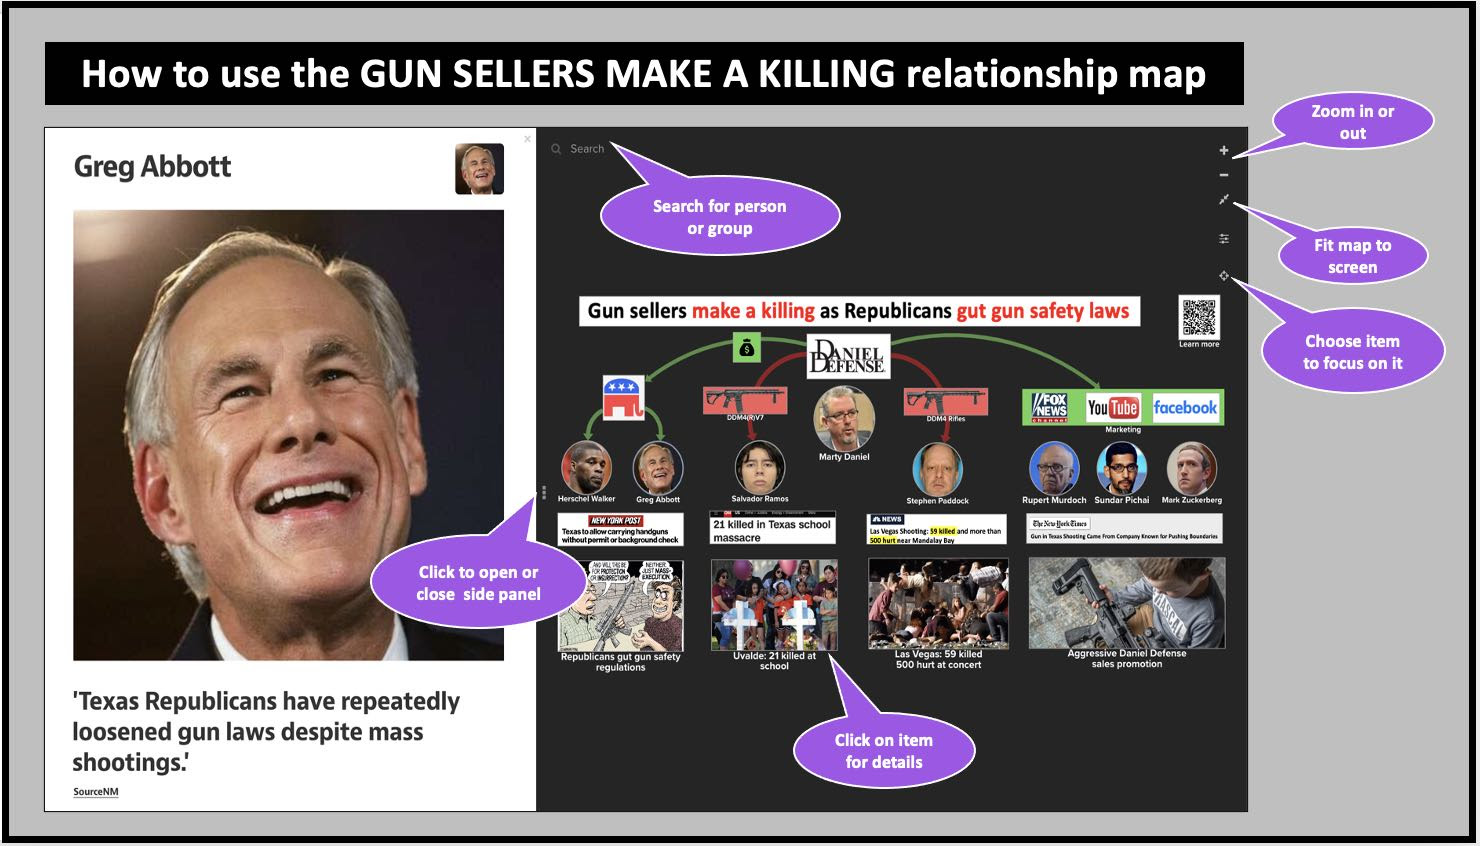 How to use this relationship map which shows the connection between blood money donations and Republicans gutting gun safety regulations